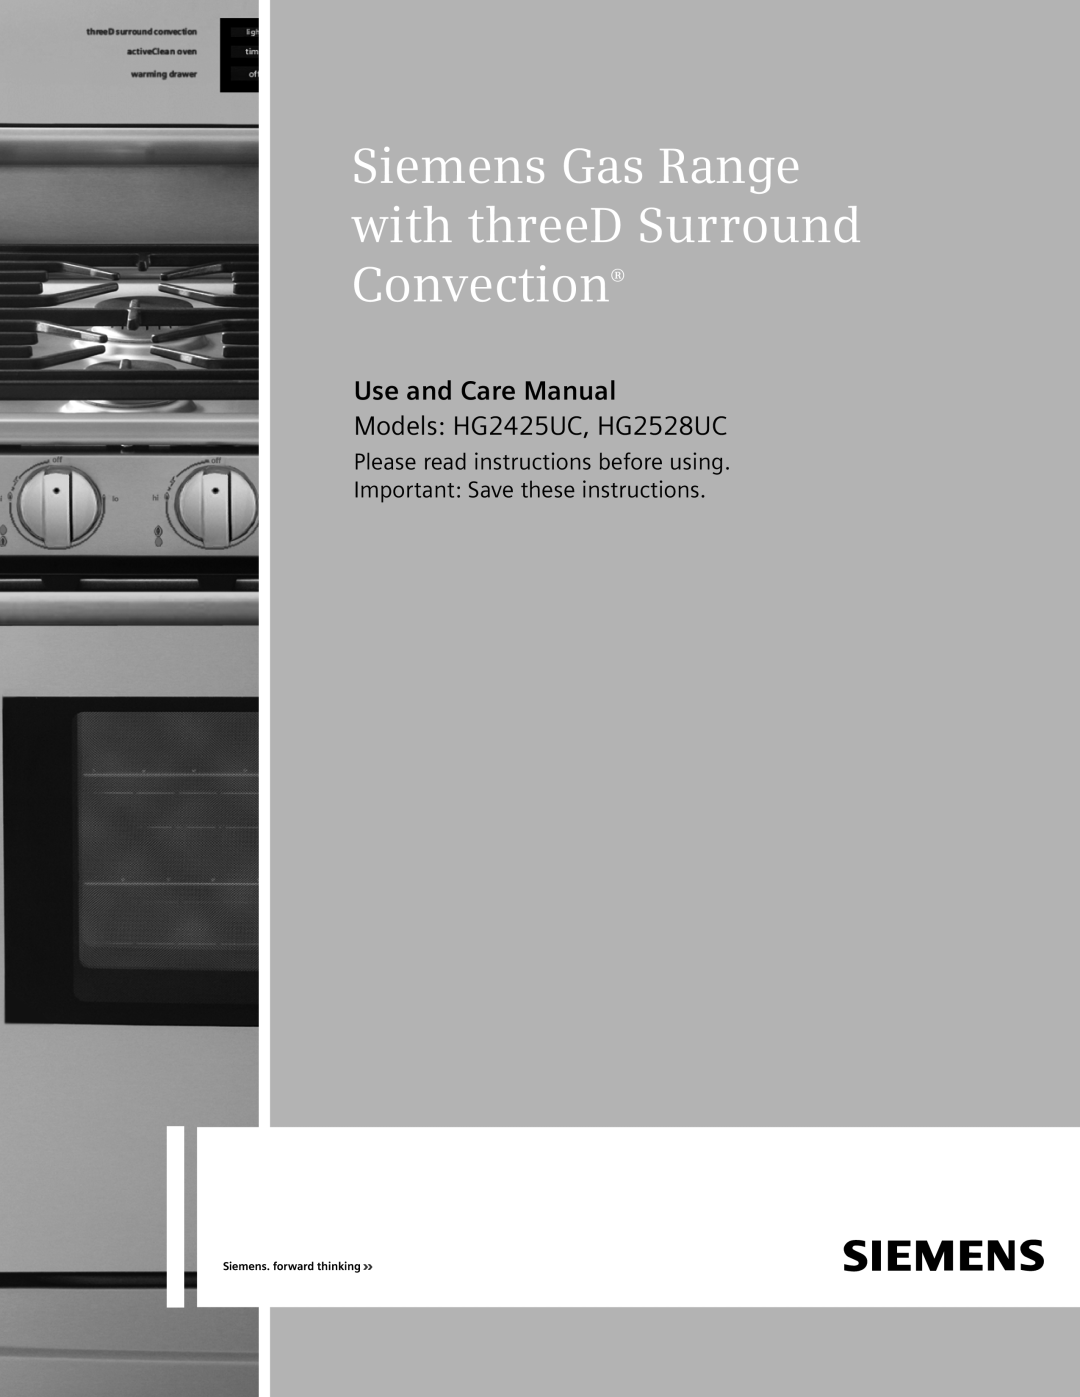 Siemens manual Siemens Gas Range with threeD Surround Convection, Use and Care Manual, Models HG2425UC, HG2528UC 